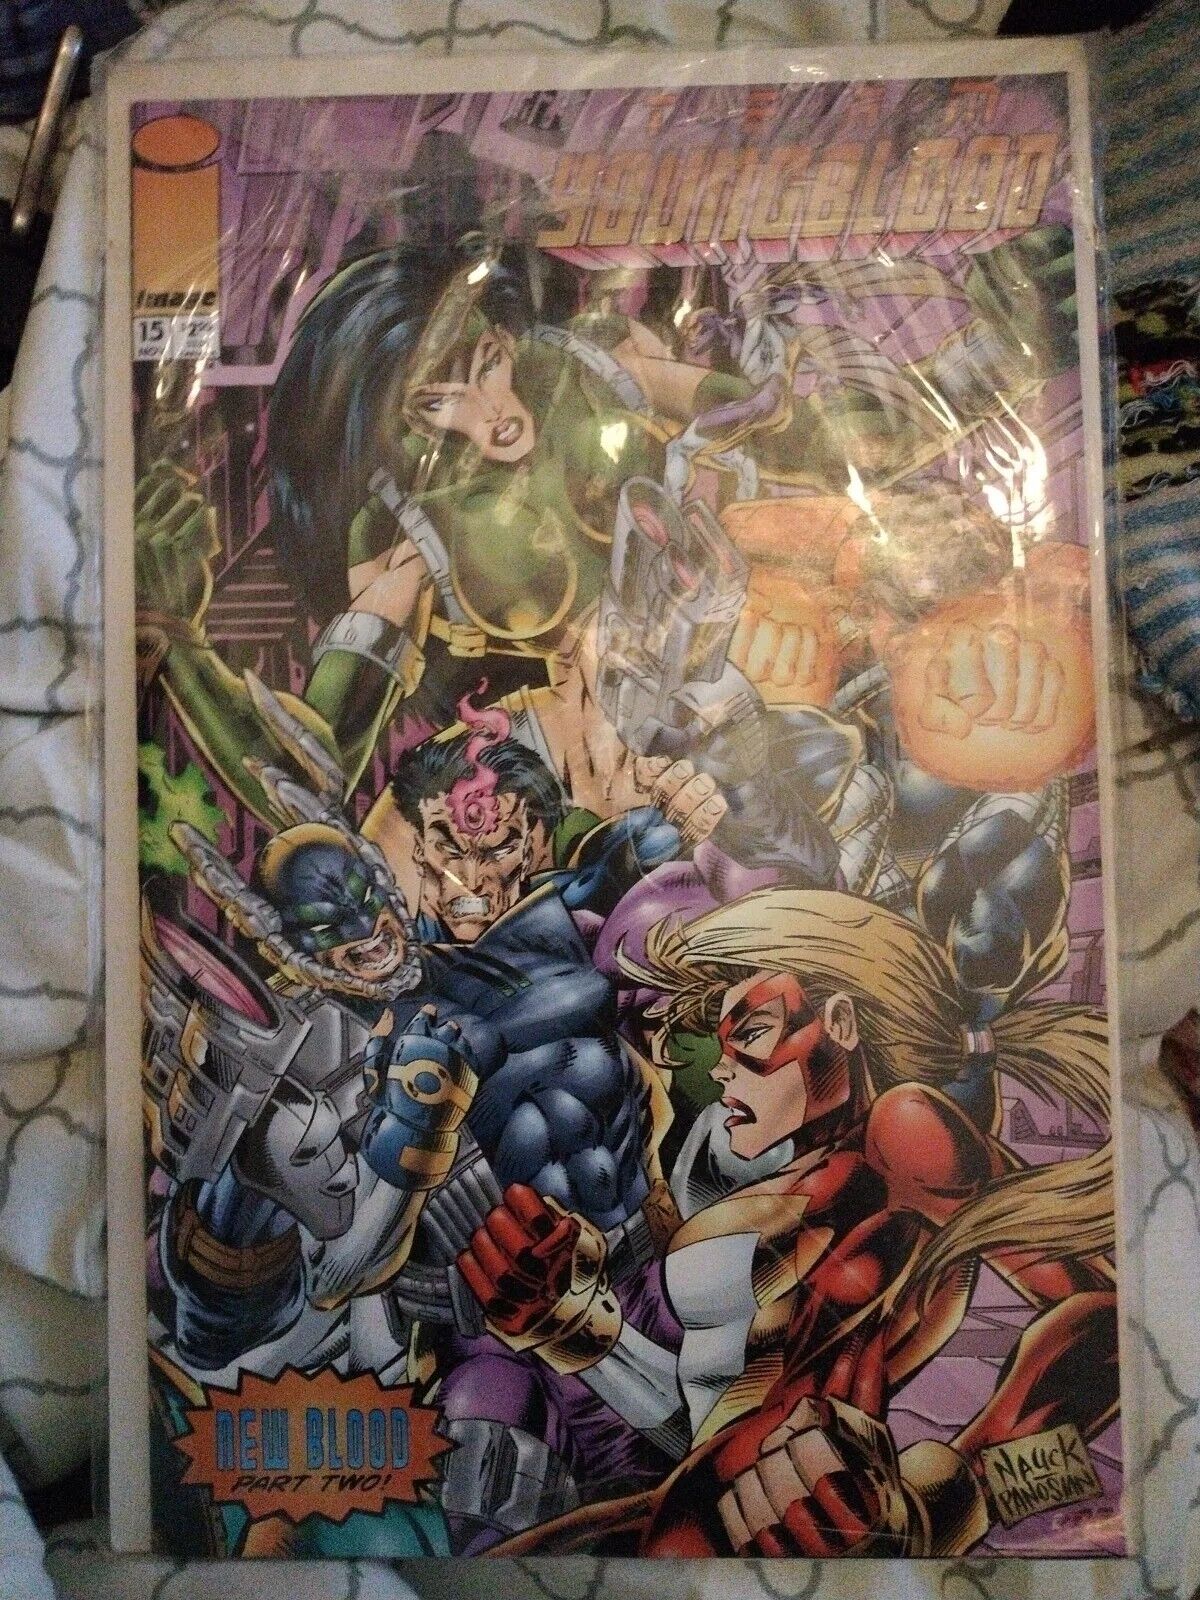 Team Youngblood #15 Nov. 1994, Image Comics Bag And Boarded